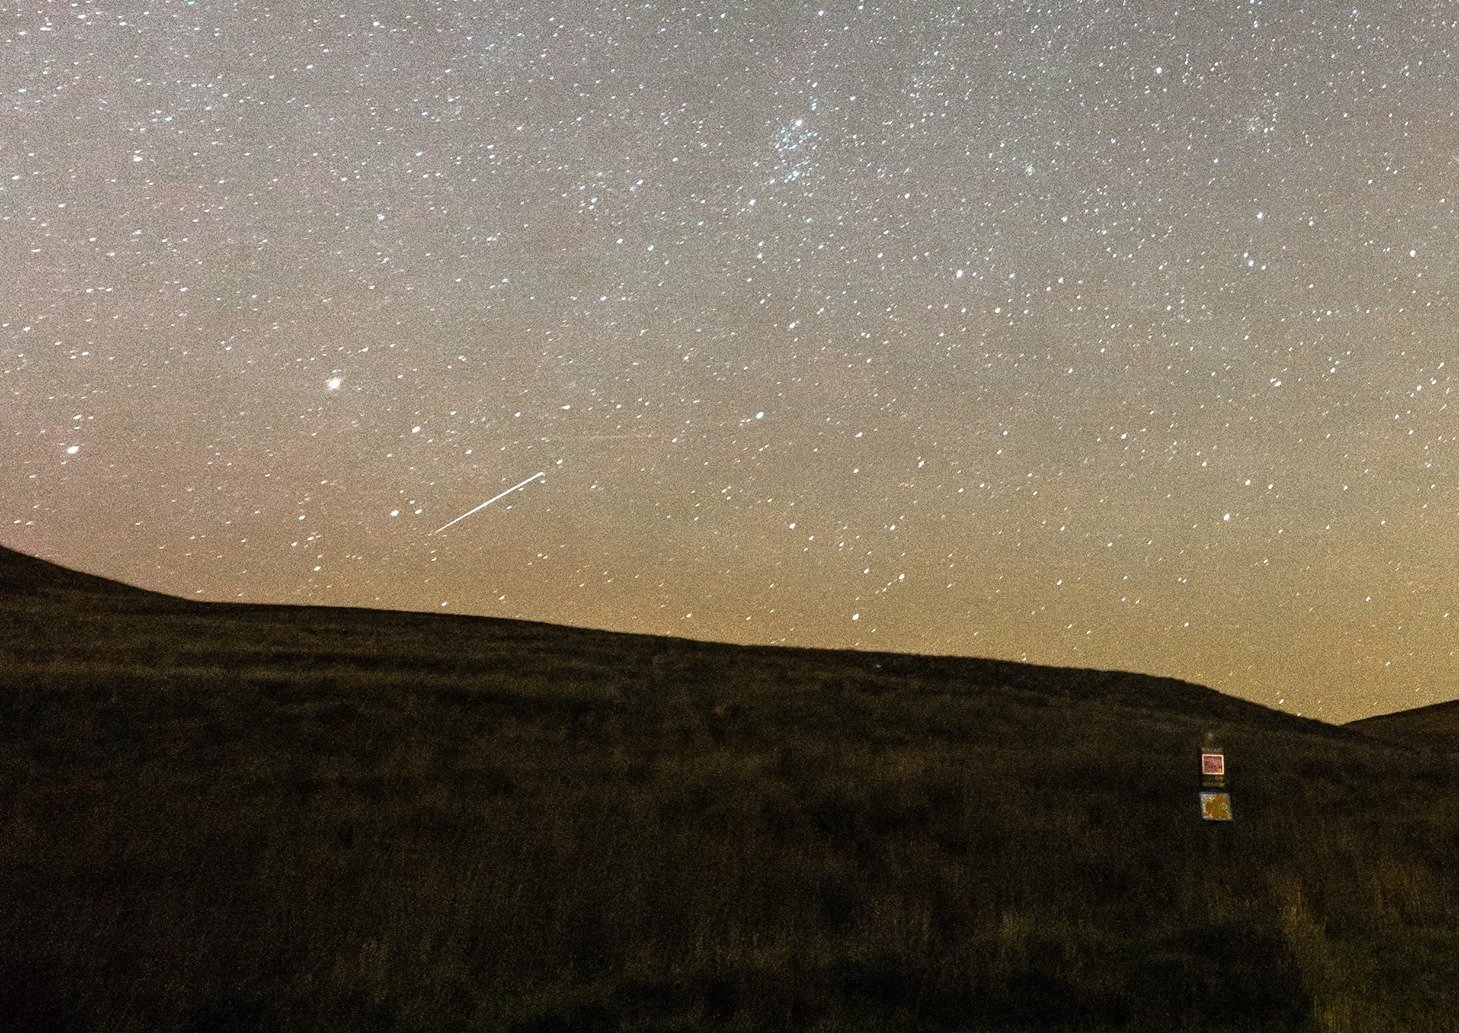 Stargazing in Forest Of Bowland AONB